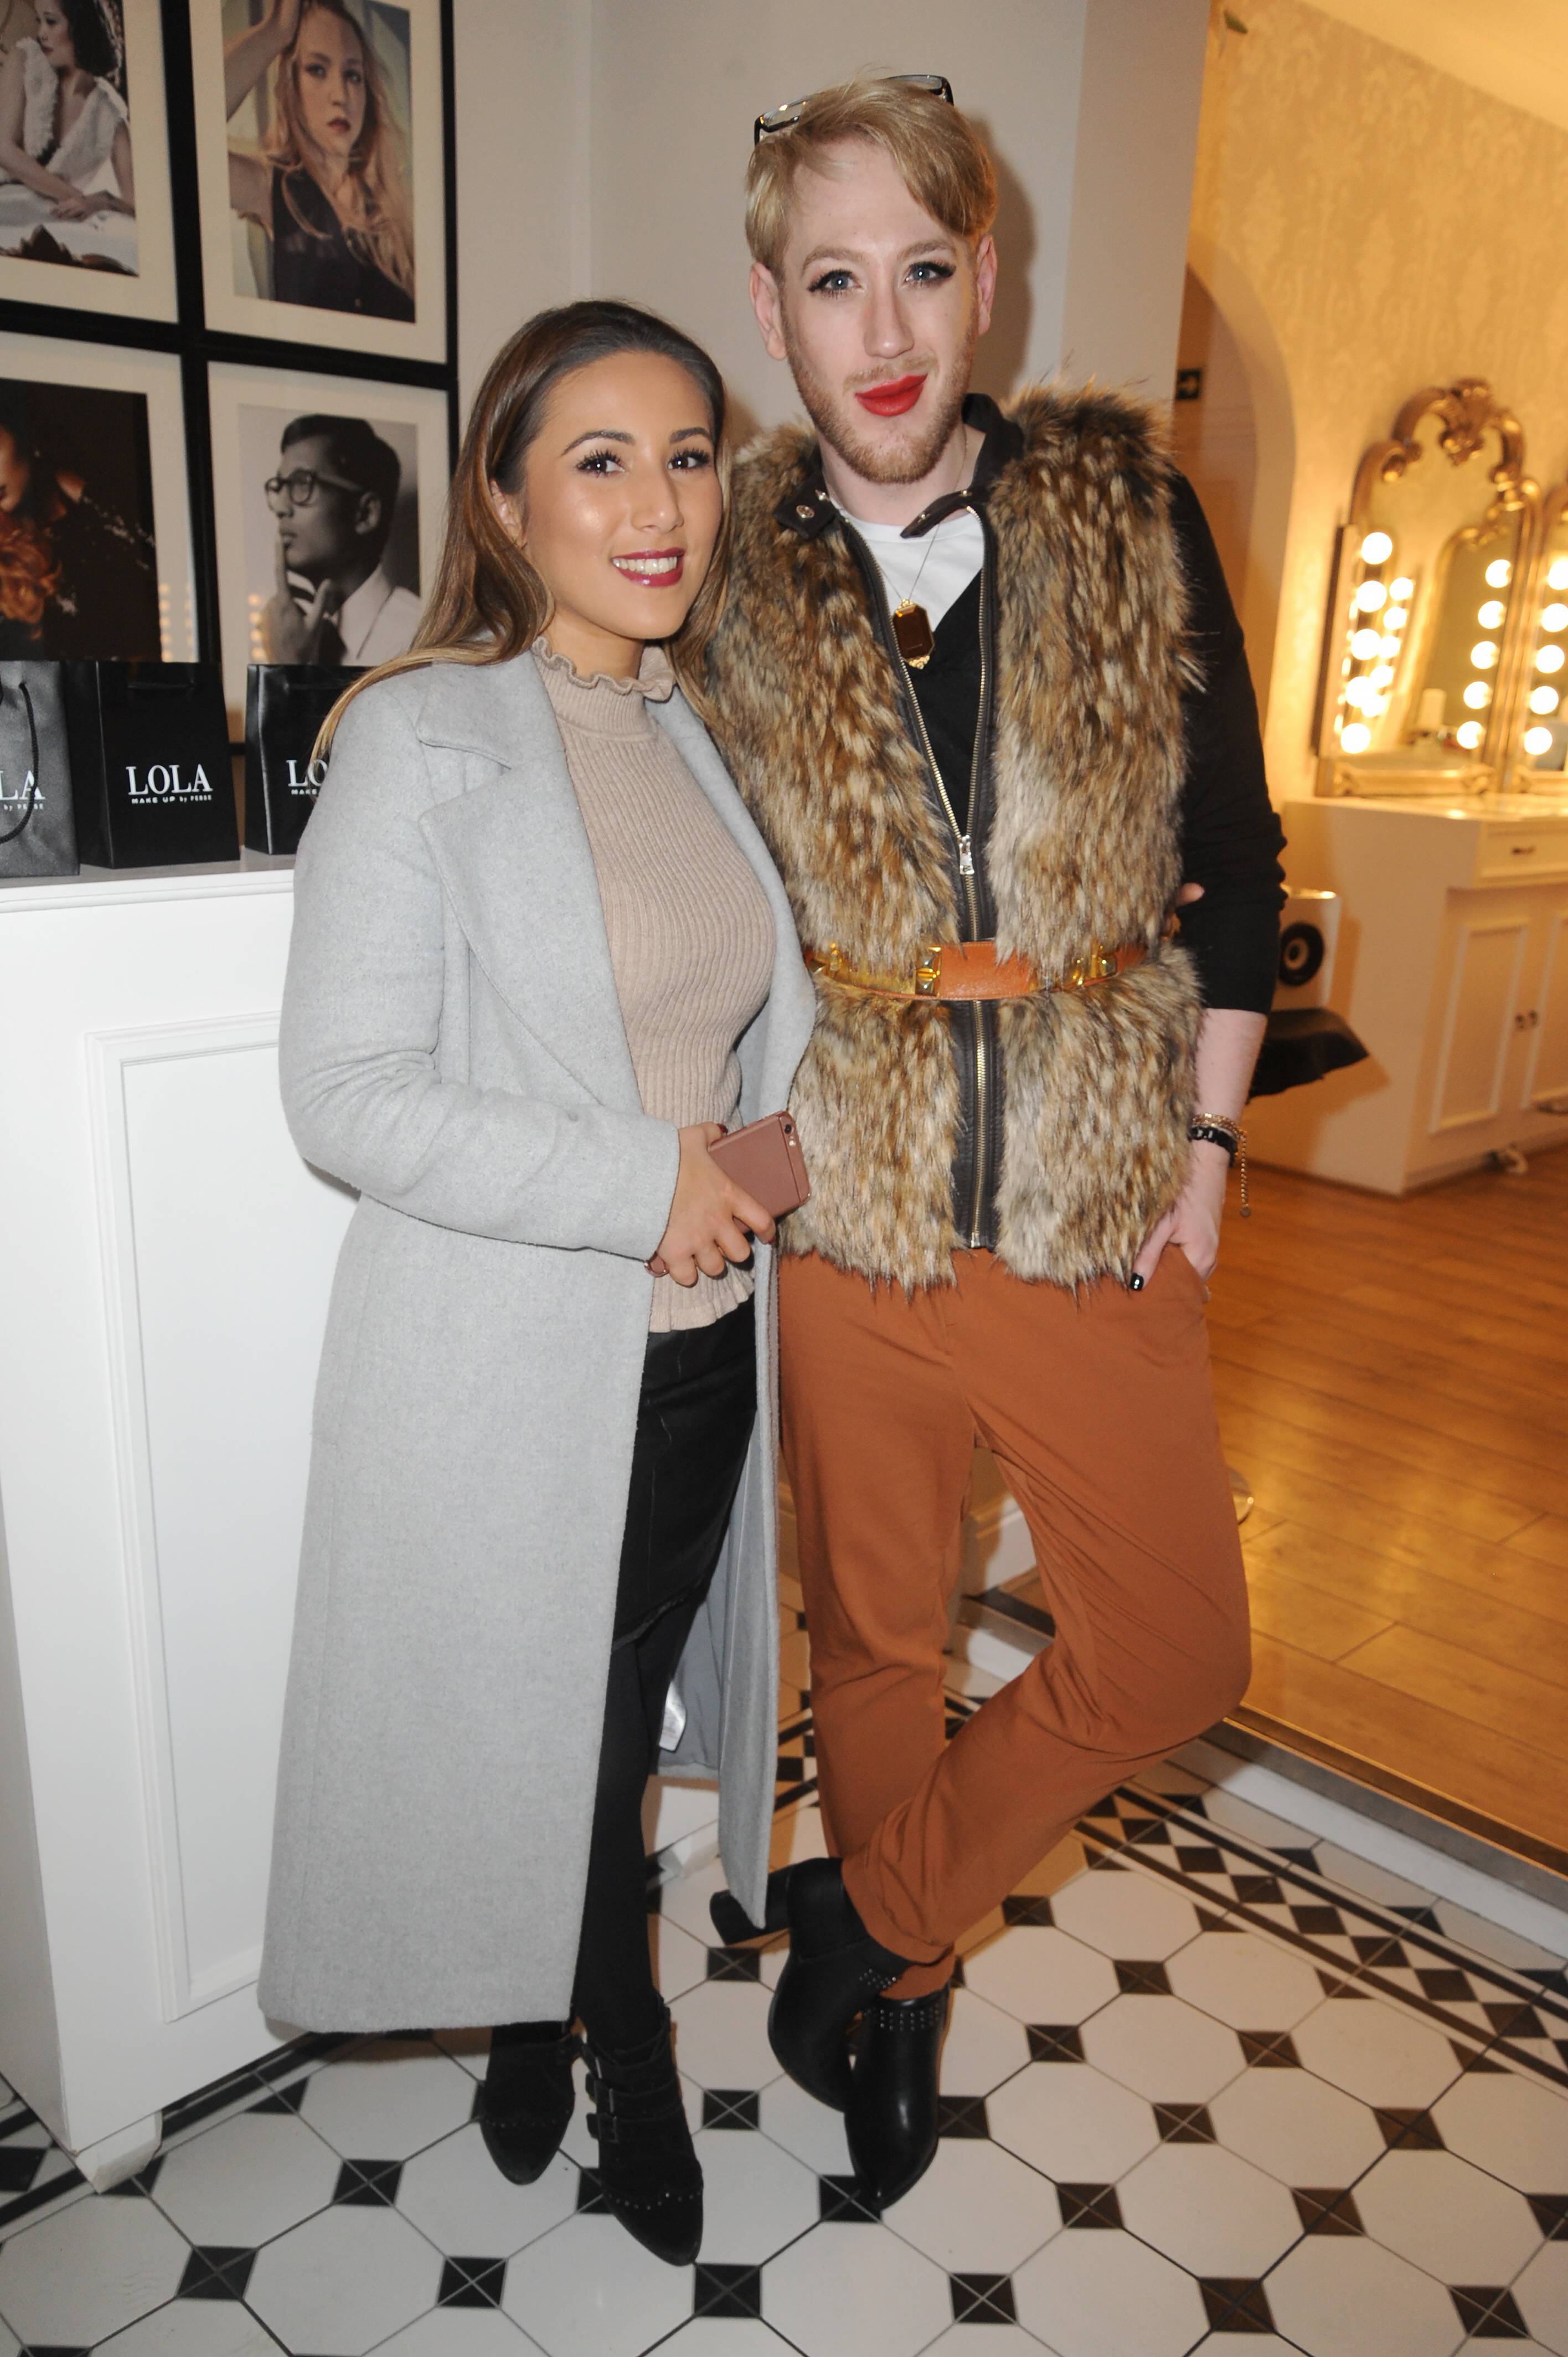 Mona Eyes attends Lola By Perse Boutique Launch